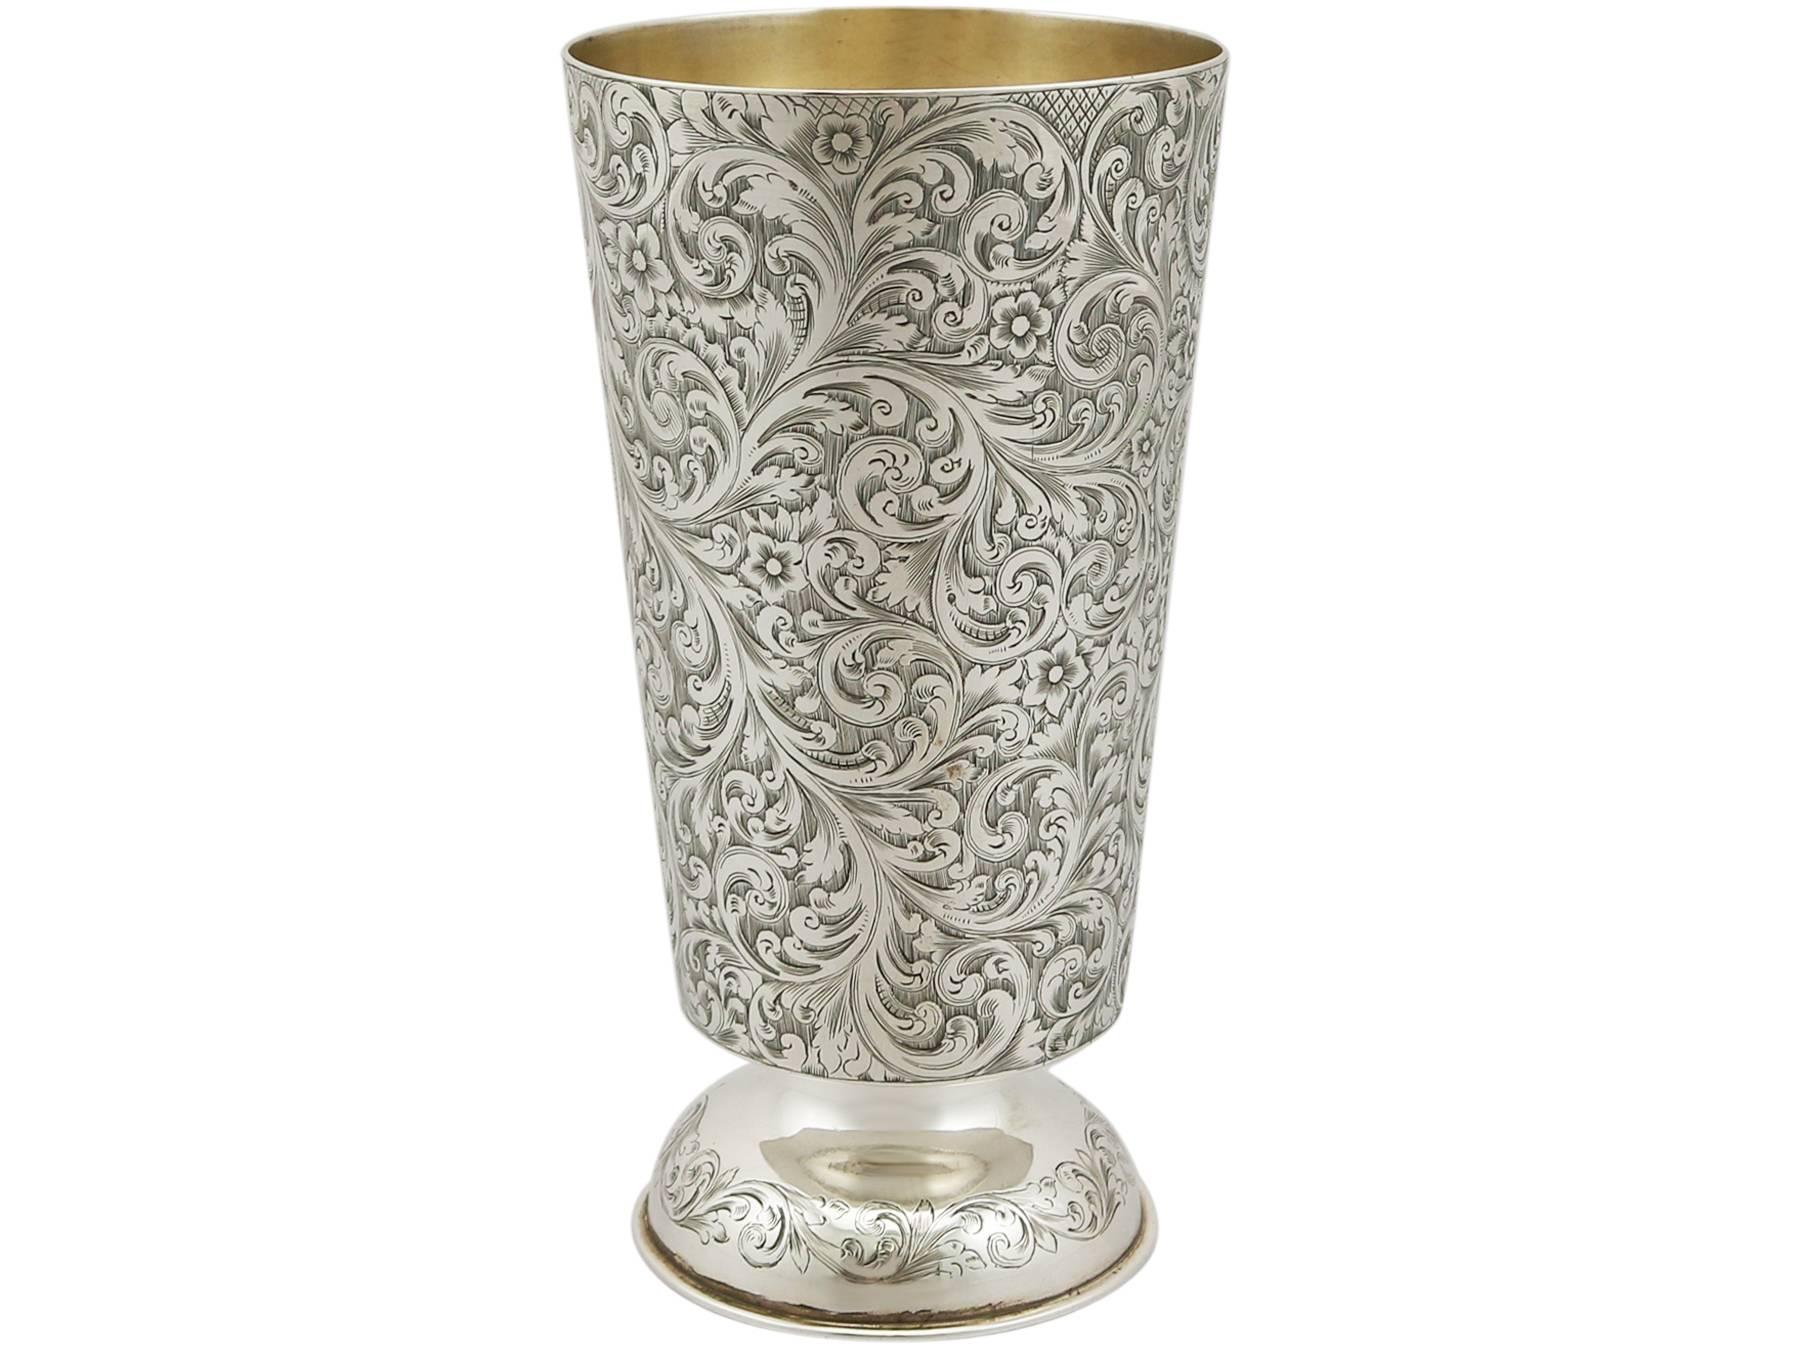 An exceptional, fine and impressive antique Indian silver vase; an addition to our Asian silverware collection.

This exceptional antique Indian silver vase has a tapering cylindrical form onto a circular doomed foot.

The surface of this silver